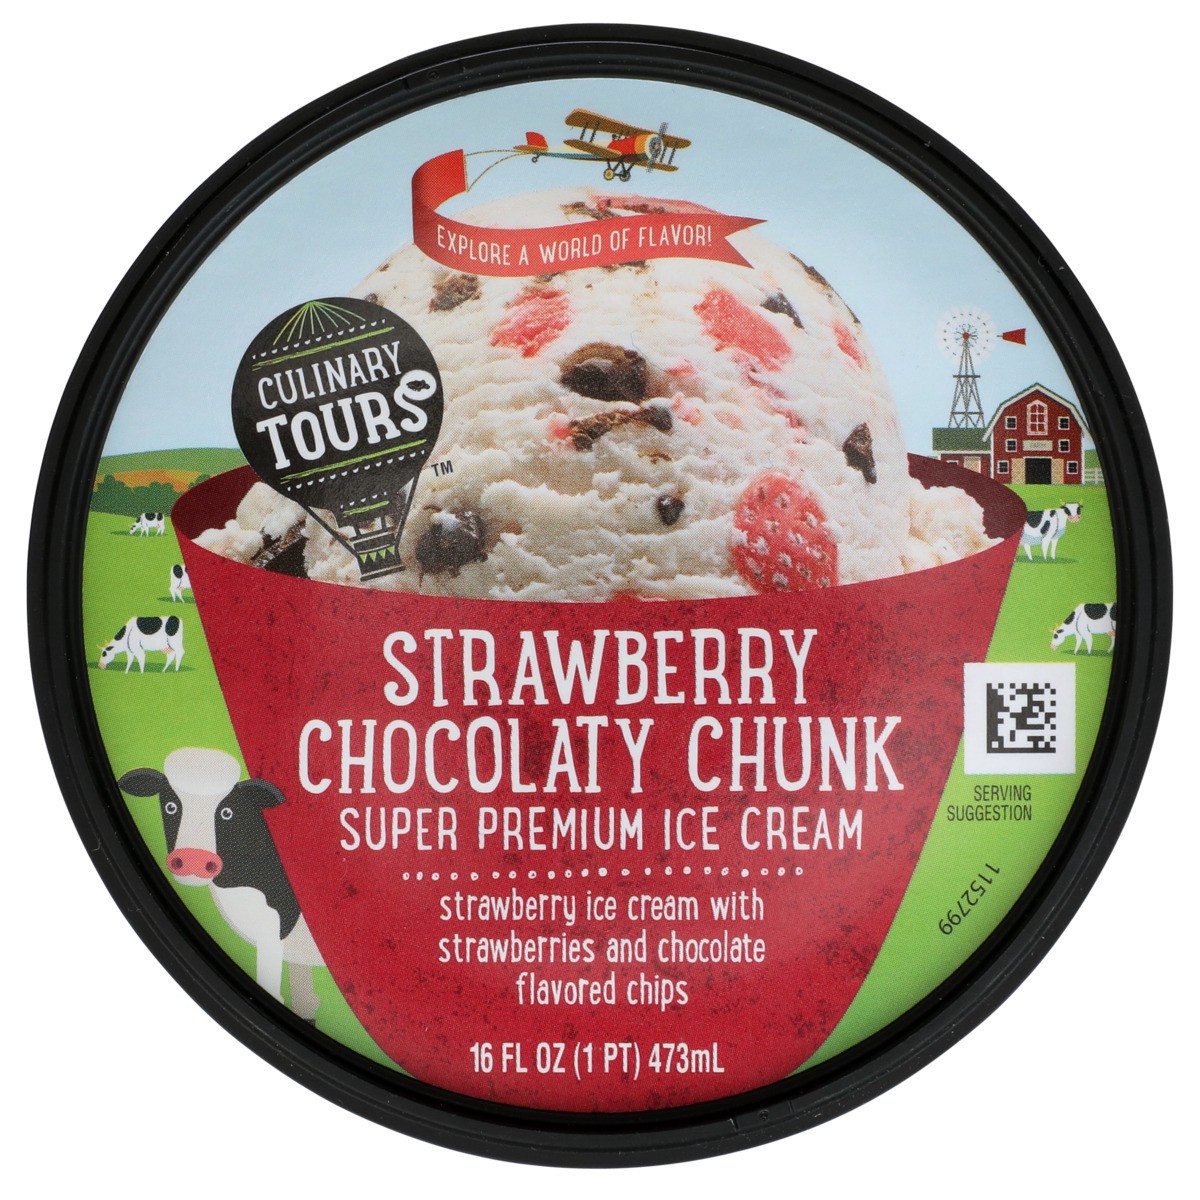 slide 5 of 9, Culinary Tours Strawberry Chocolaty Chunk Strawberry Super Premium Ice Cream With Strawberries And Chocolate Flavored Chips, 1 pint